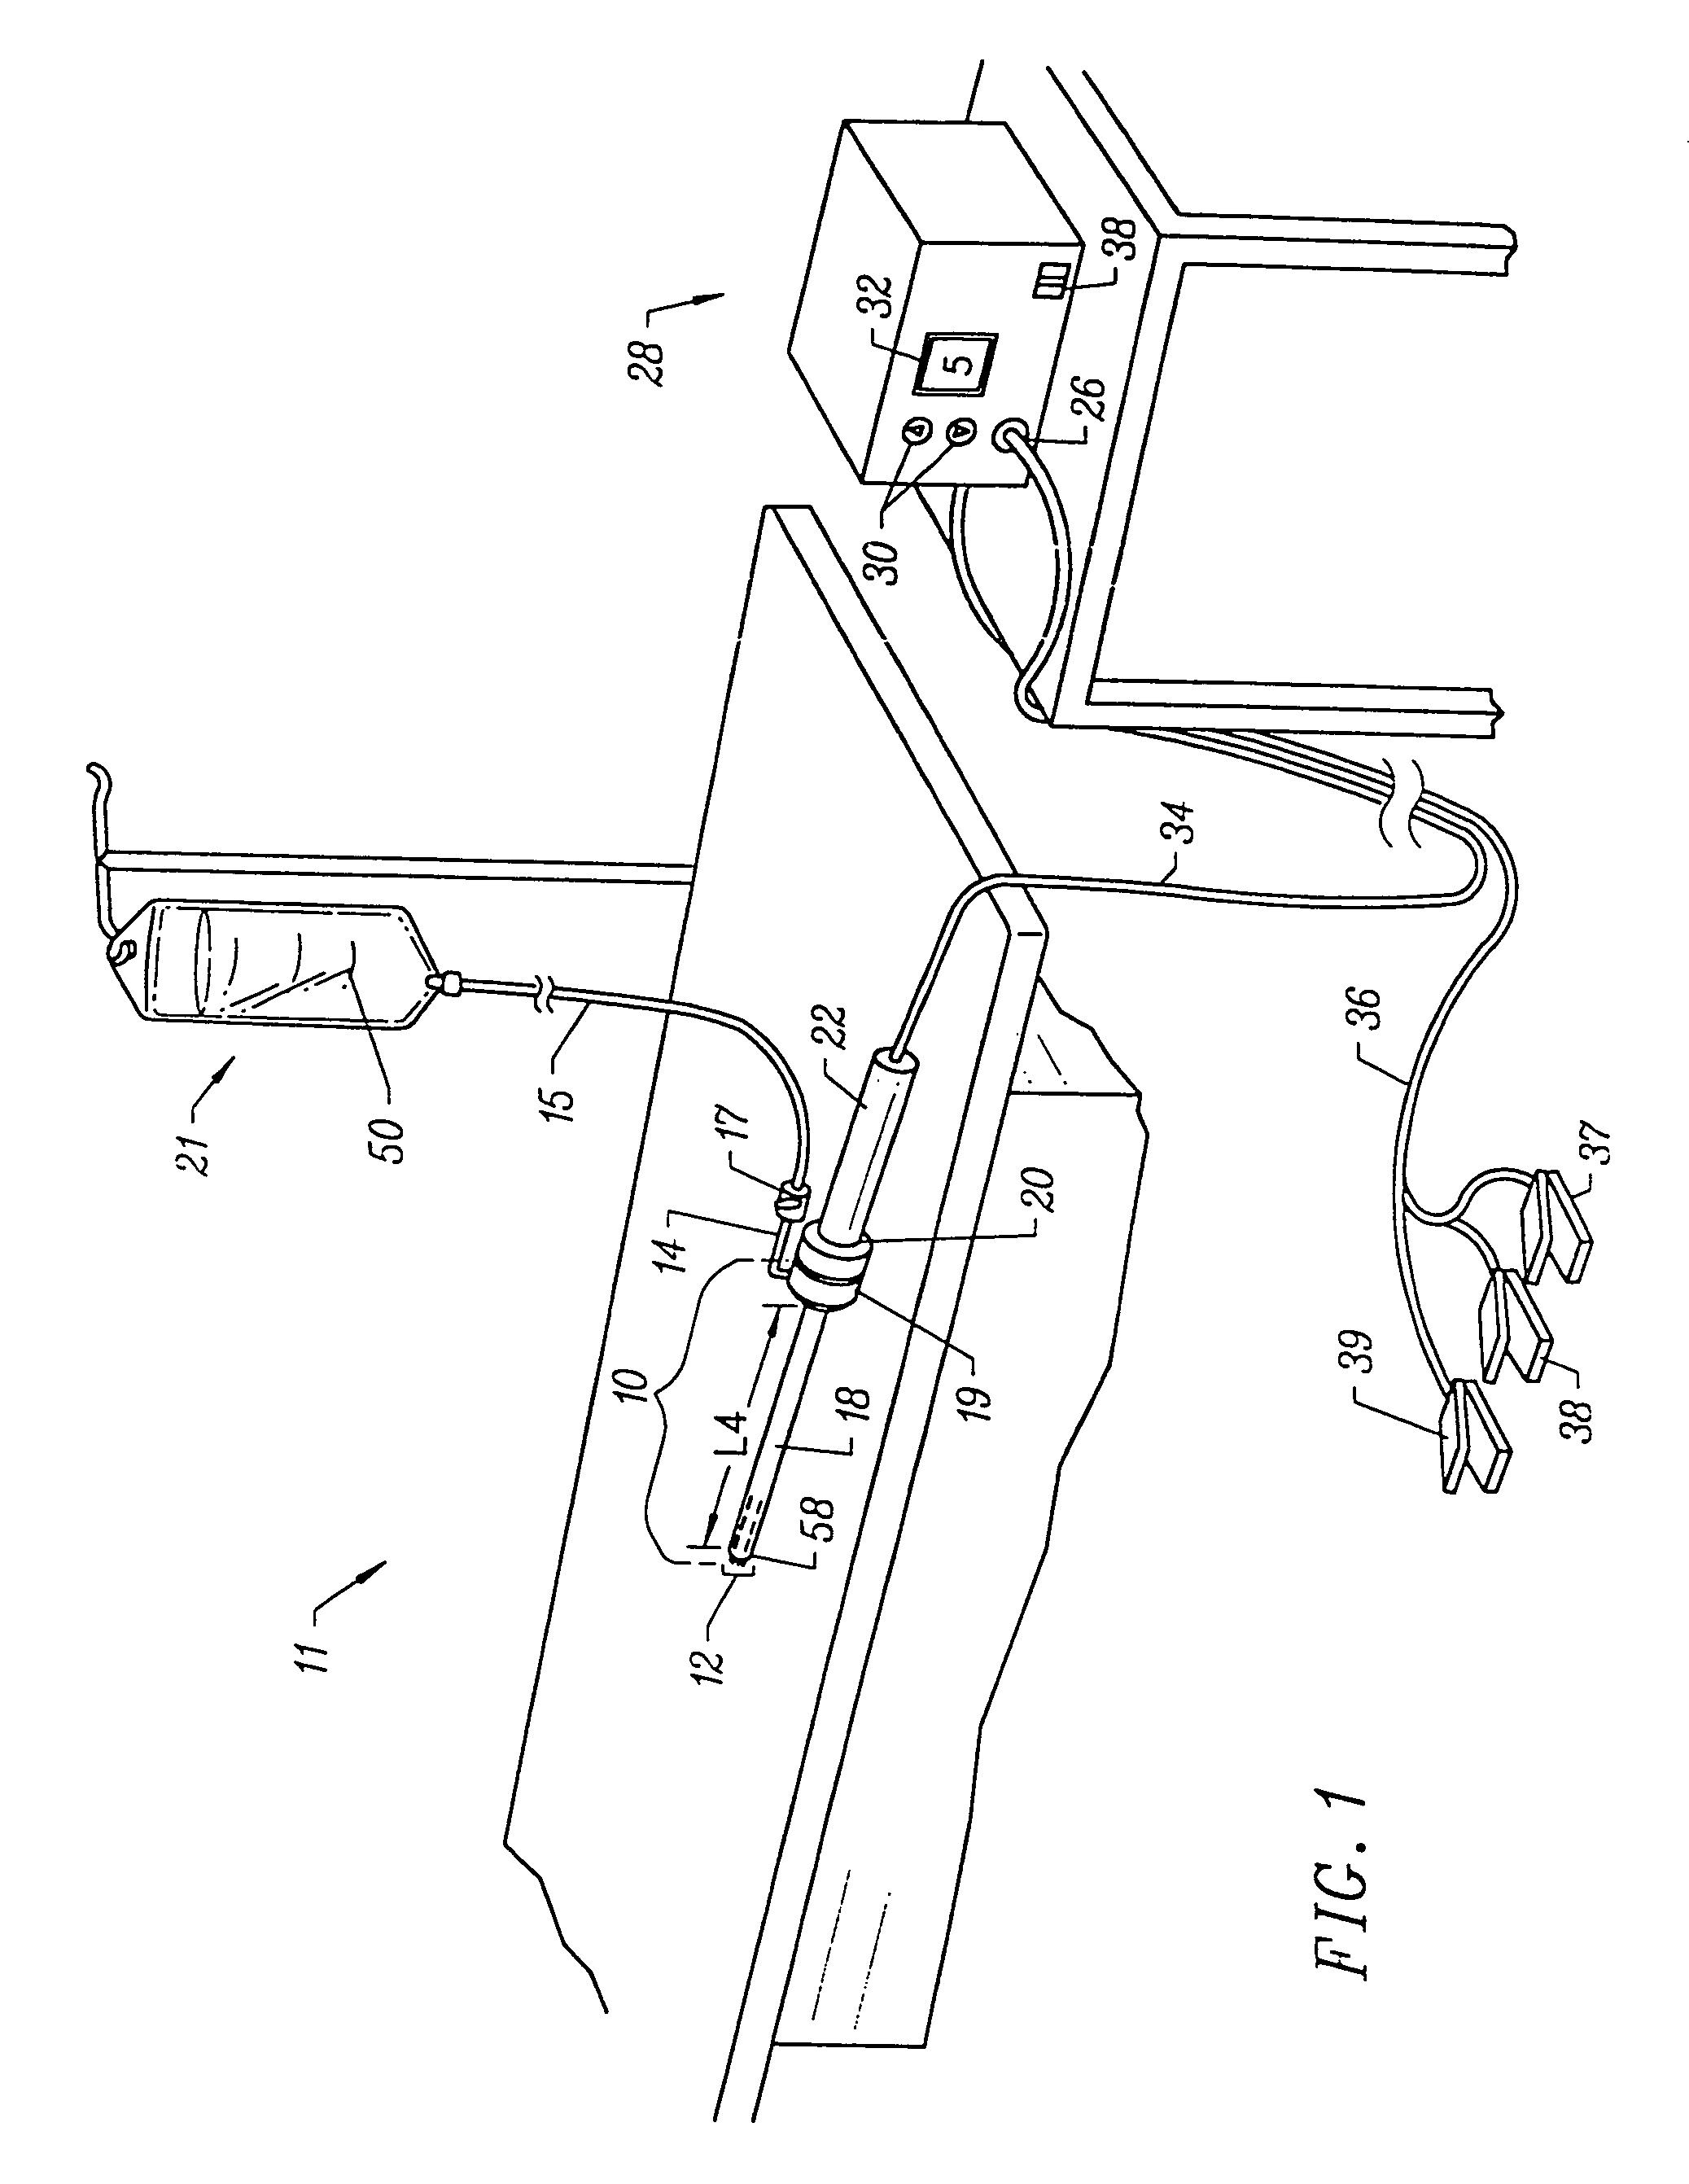 Electrosurgical apparatus having a curved distal section